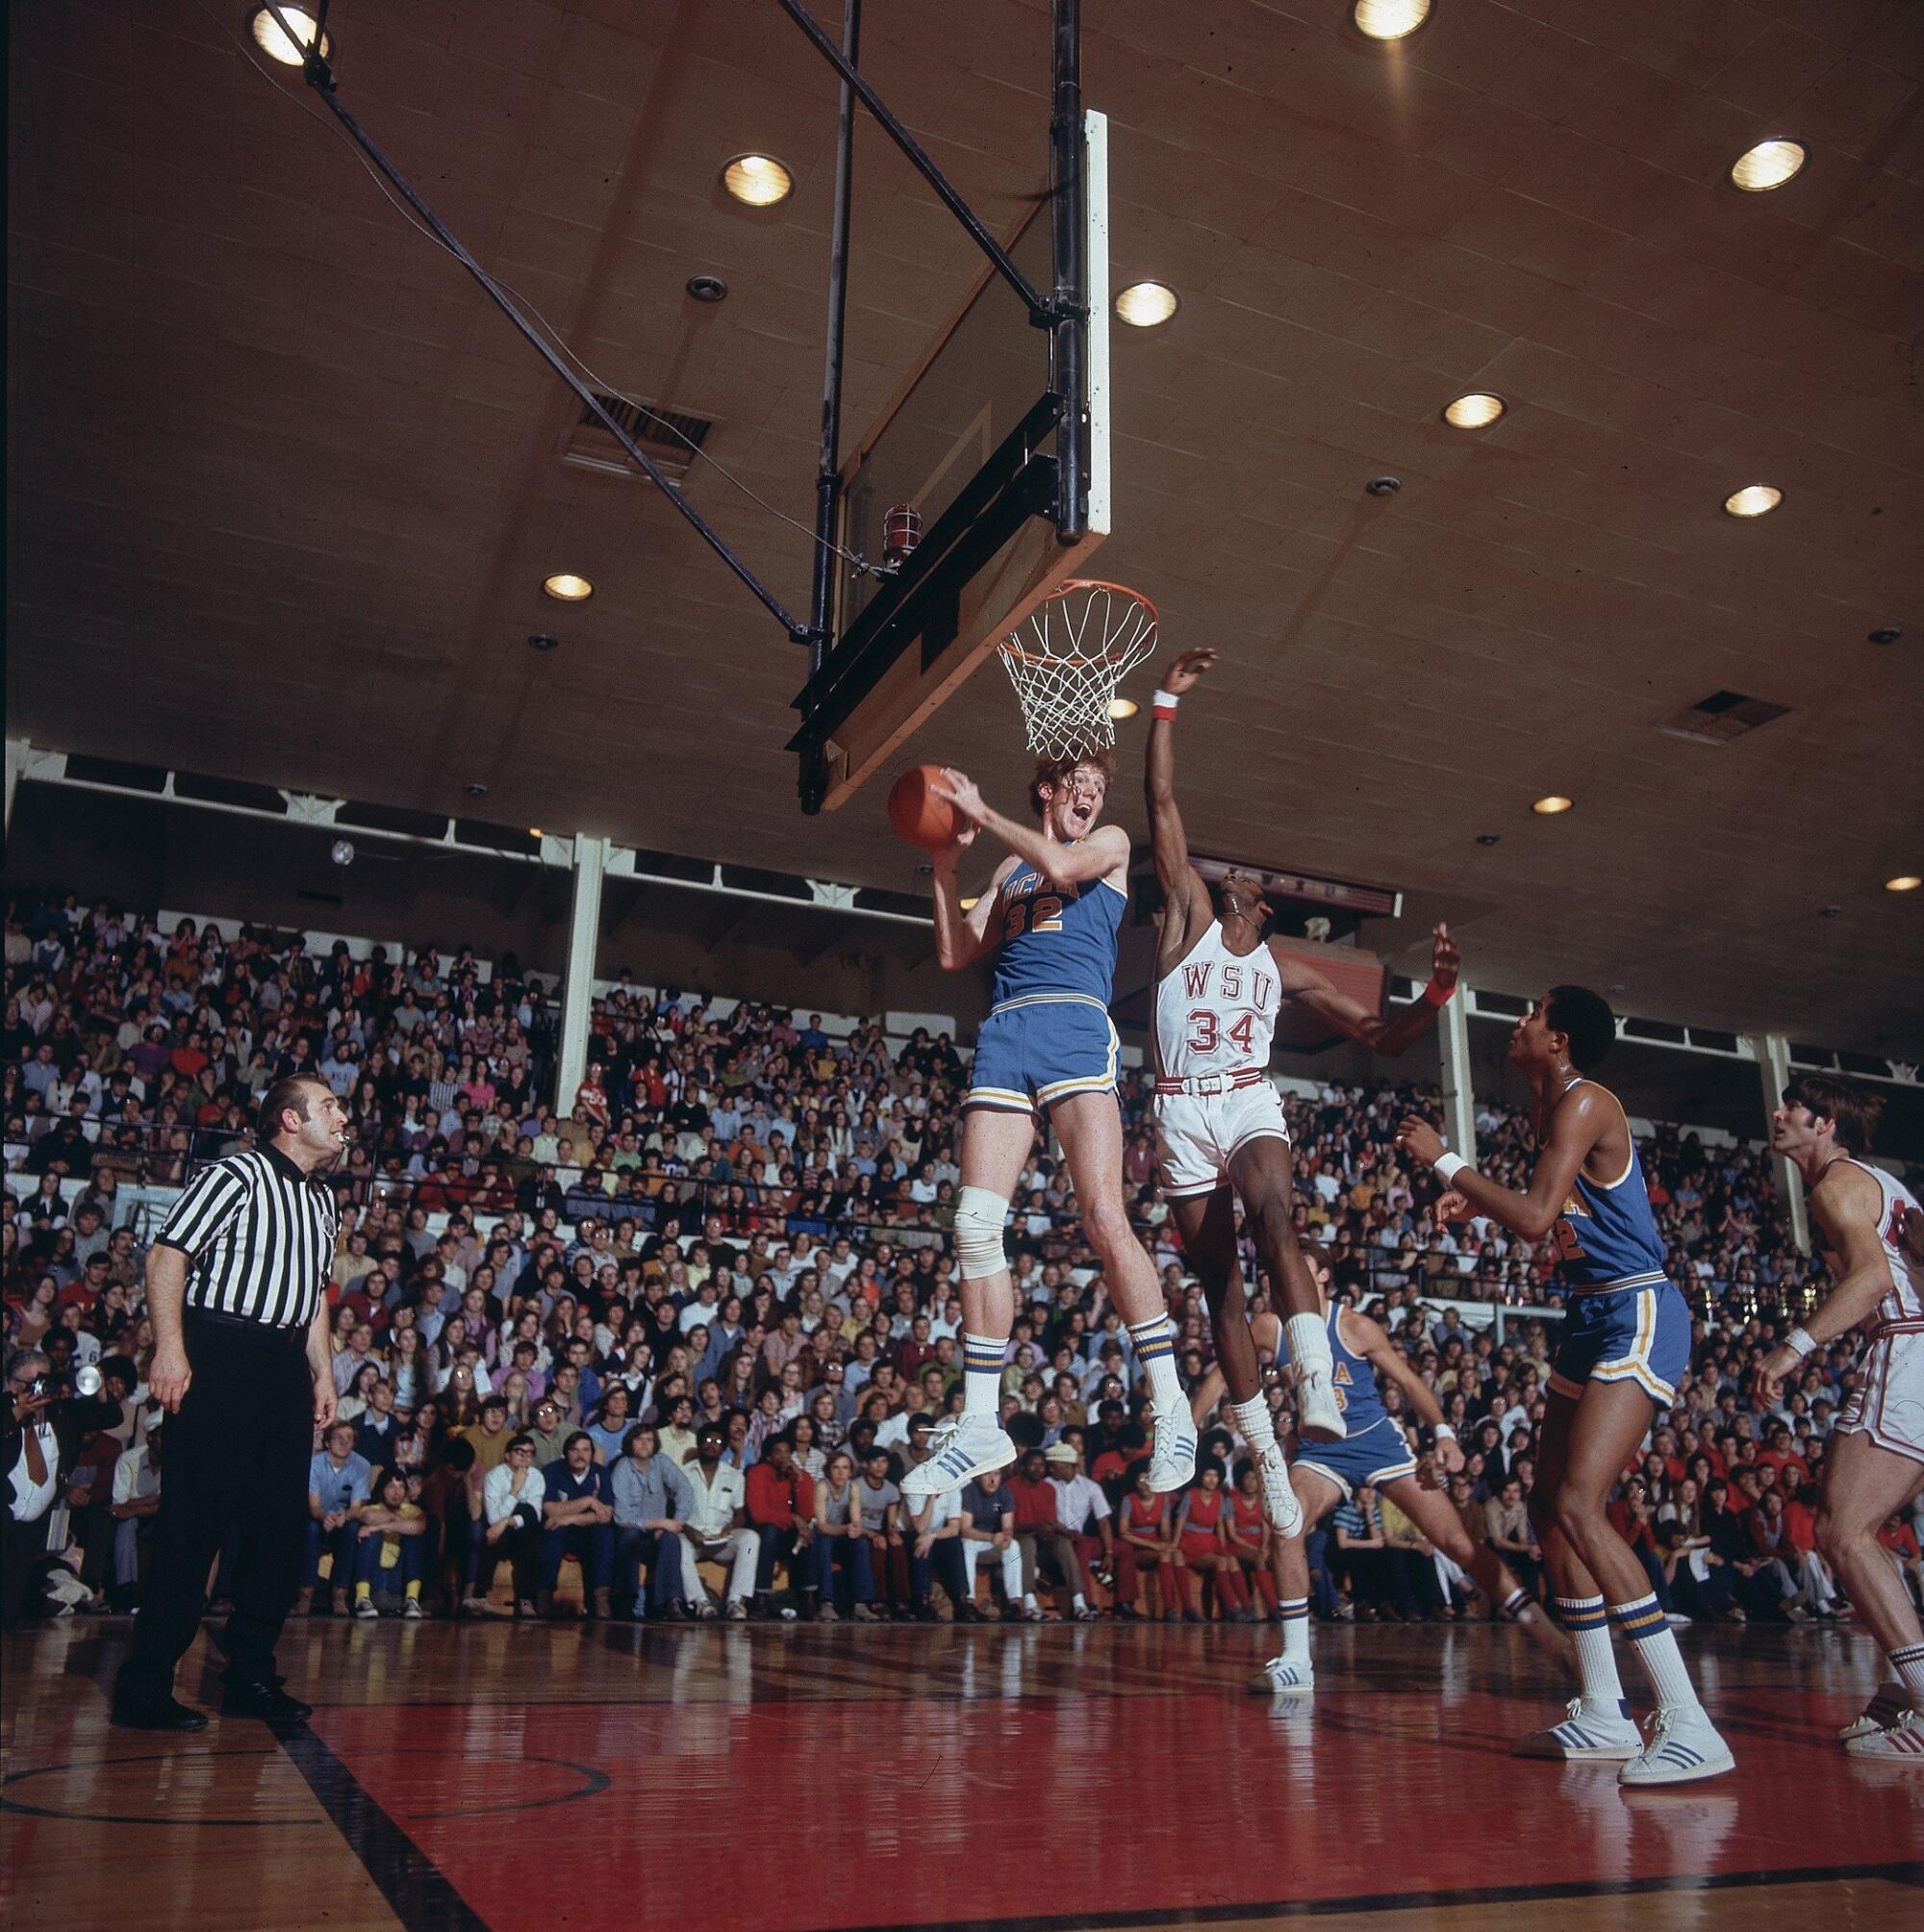 UCLA's Bill Walton plays during a game against Washington State on Feb. 21, 1972.